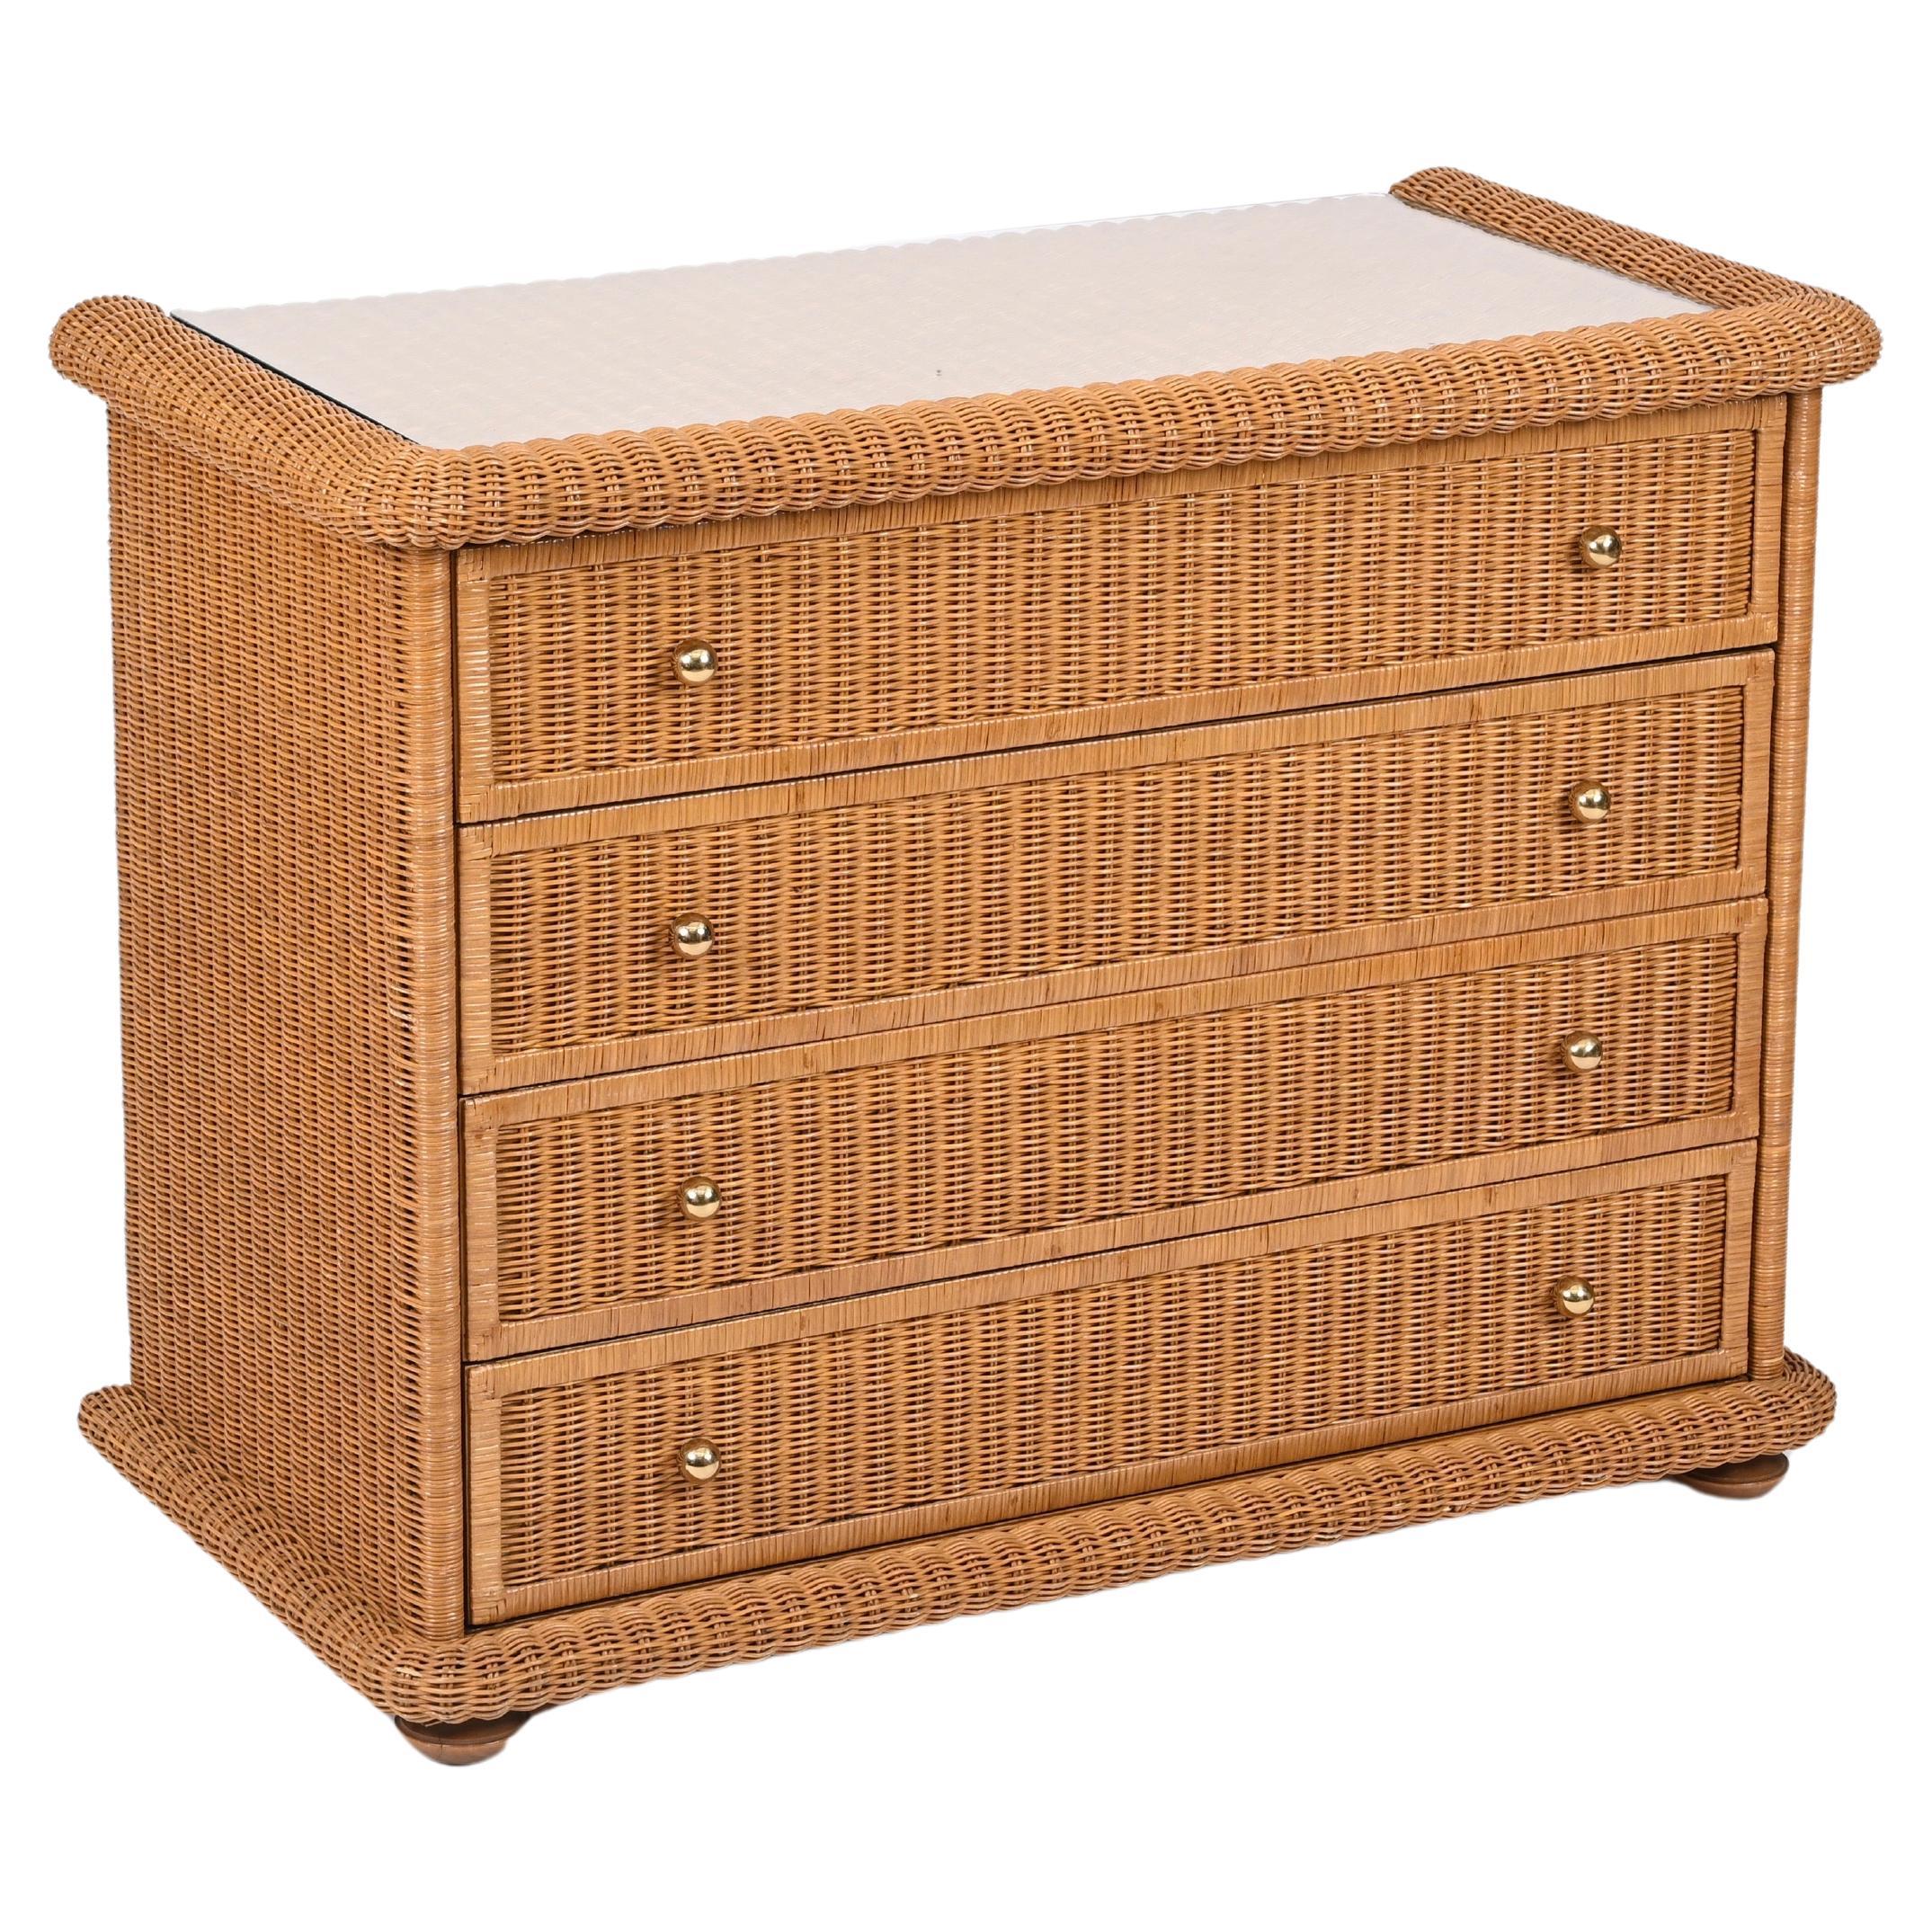 French Riviera Chest of Drawers in Woven Rattan by Vivai del Sud, Italy, 1970s